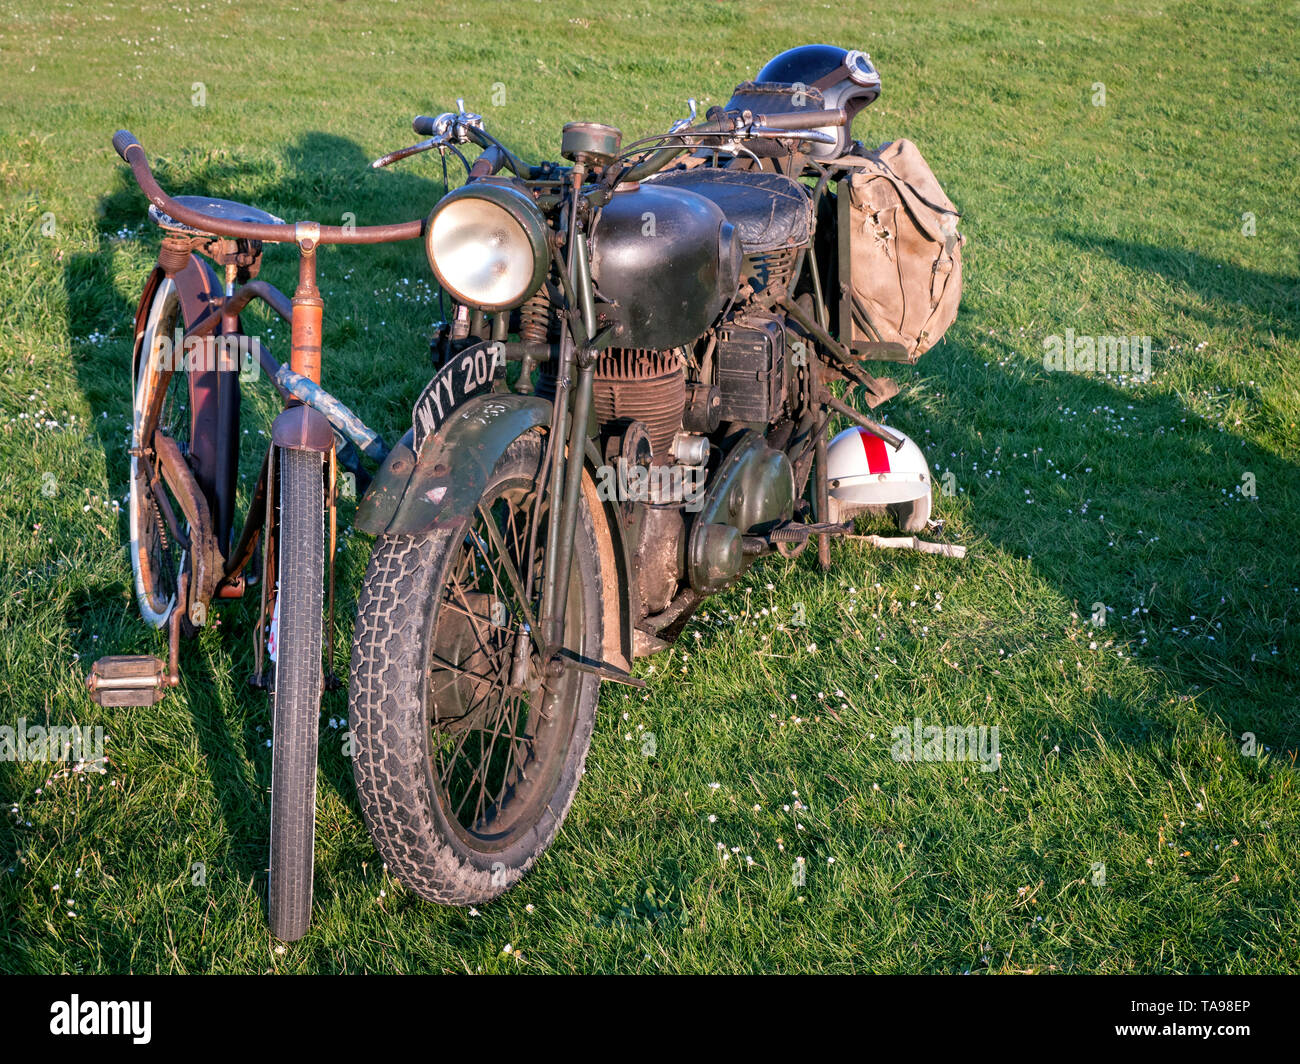 Barn find Motorcycle and bicycle Stock Photo